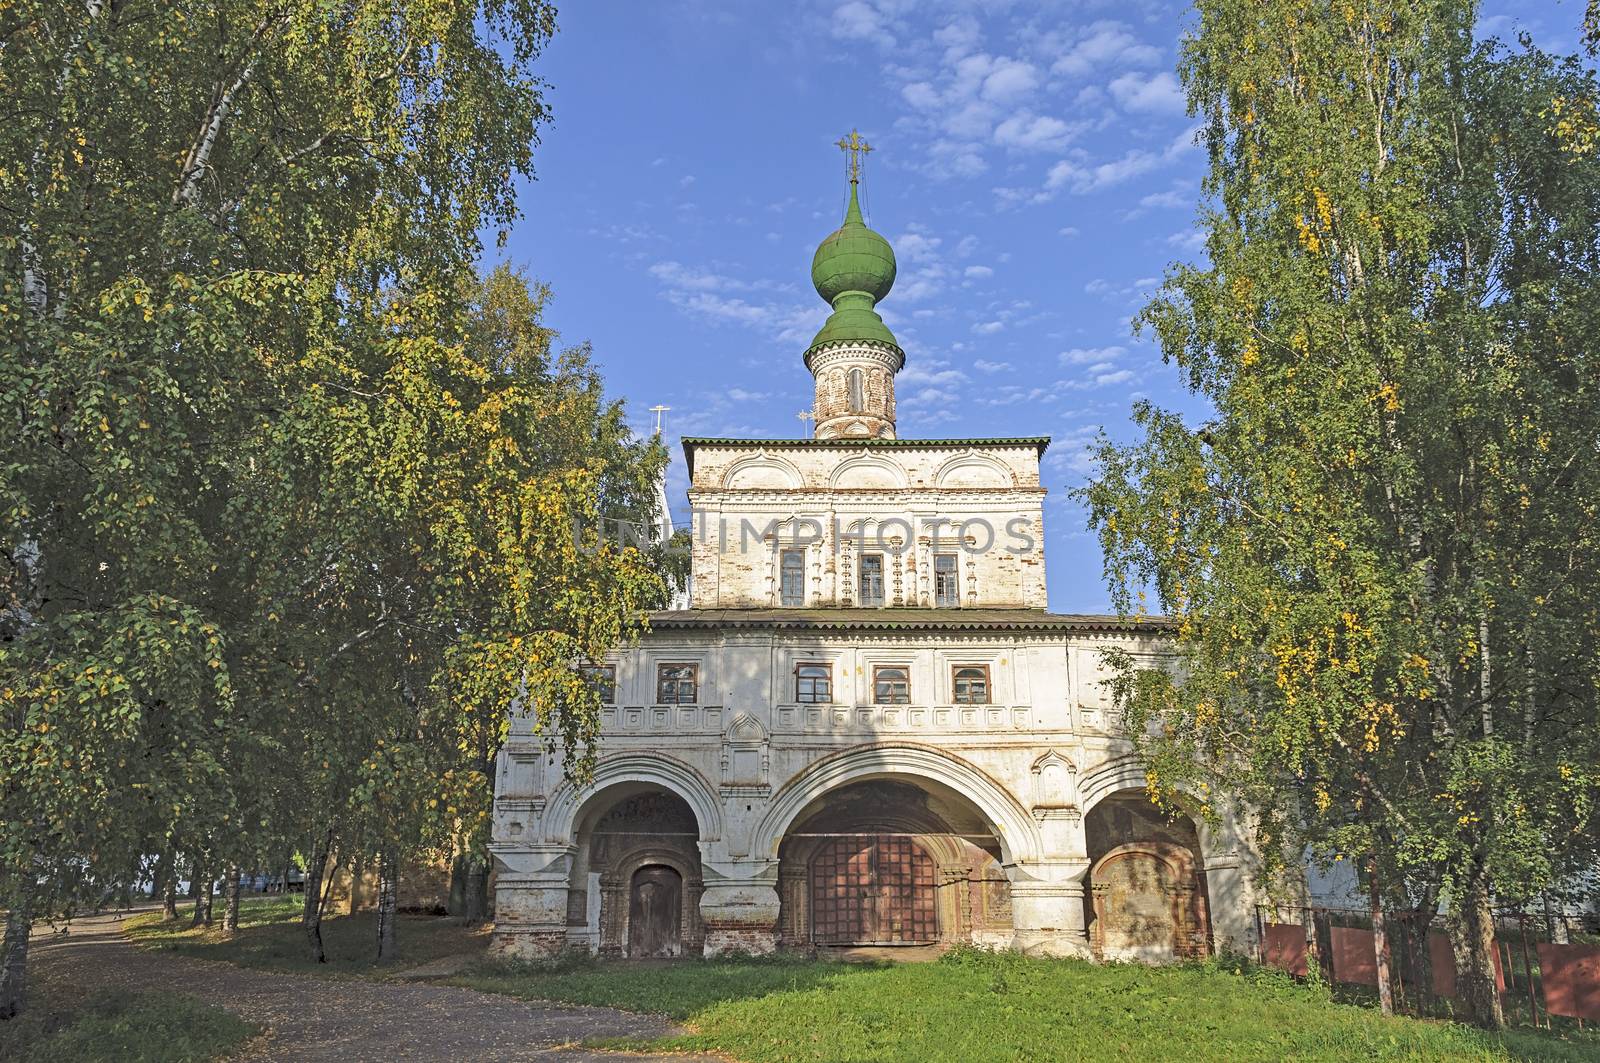 Monastery of Archangel Michael (founded by a monk Cyprian in 1212) in Veliky Ustyug, north Russia